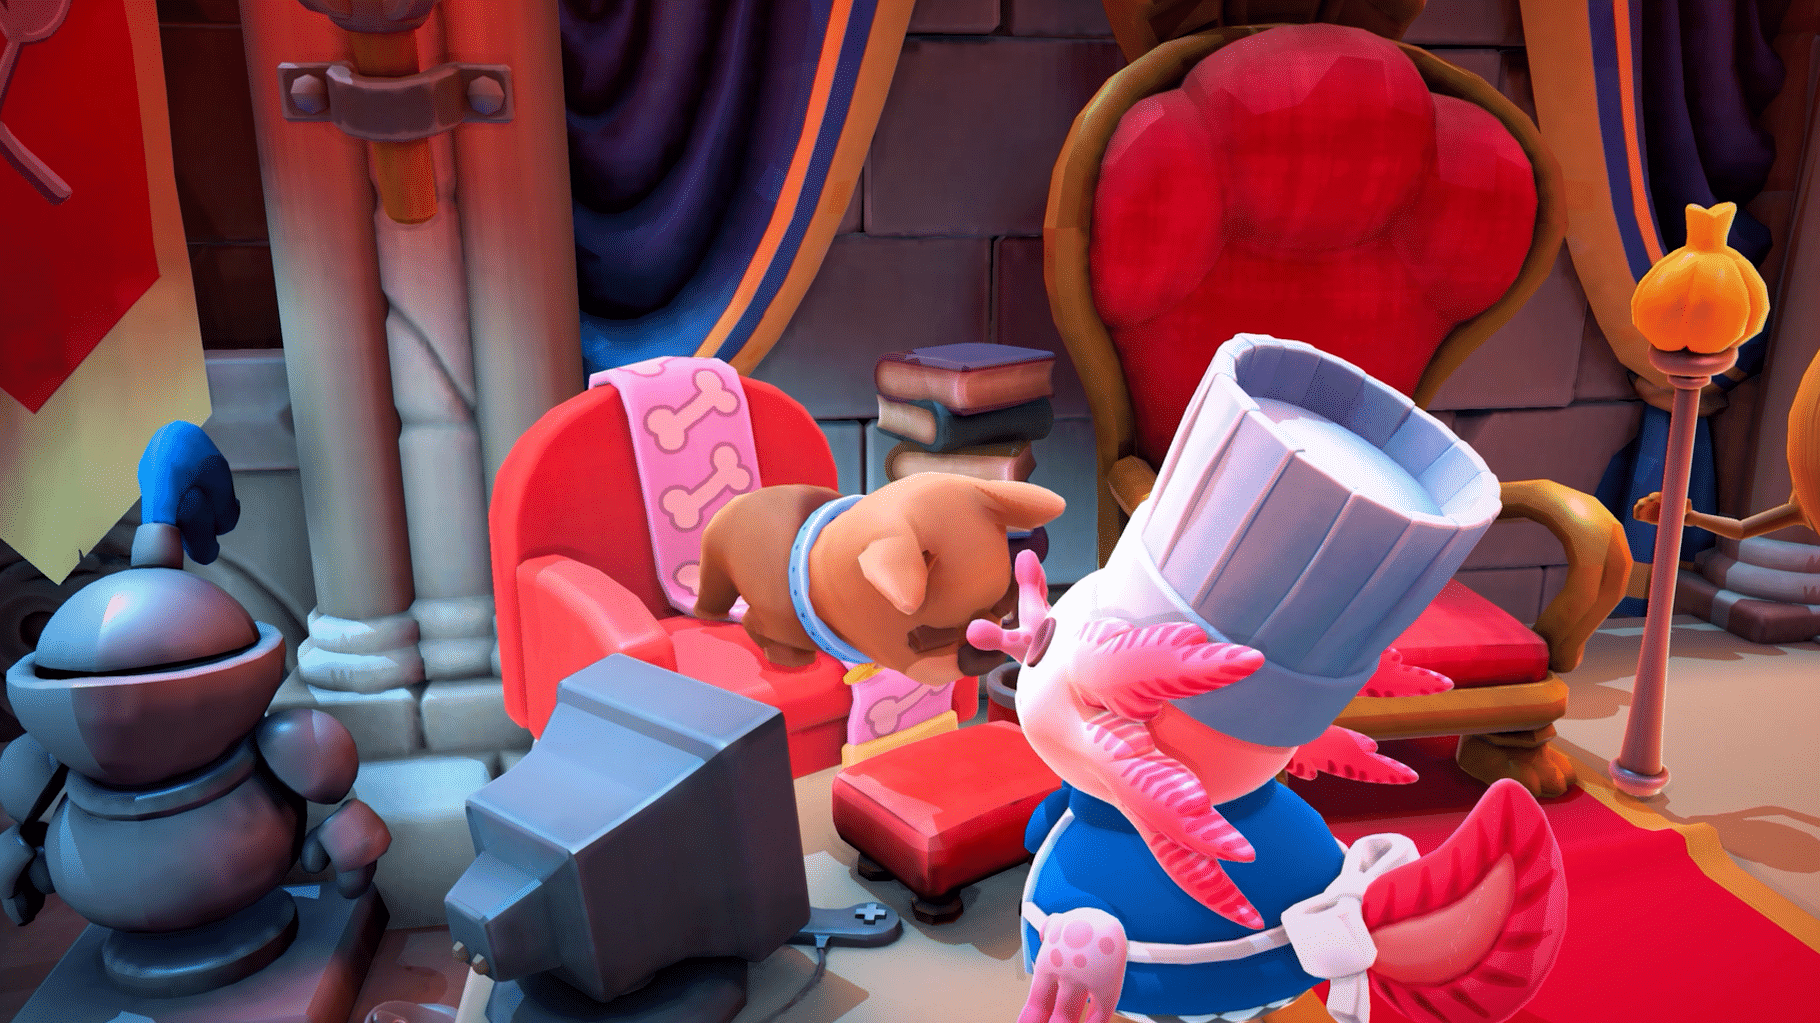 Overcooked! All You Can Eat screenshot